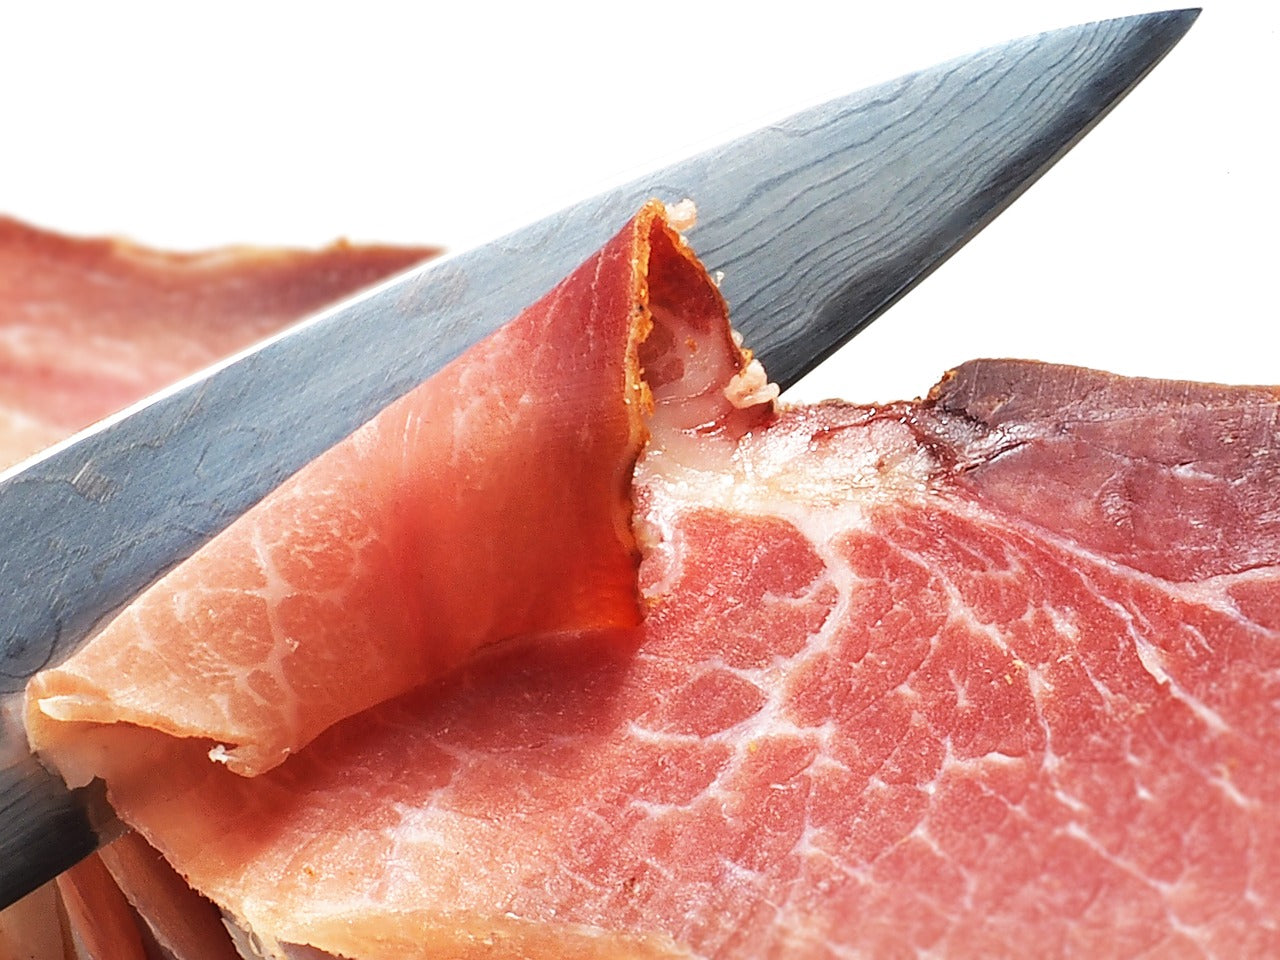 Knife sharpening stone: A knife finely slices prosciutto